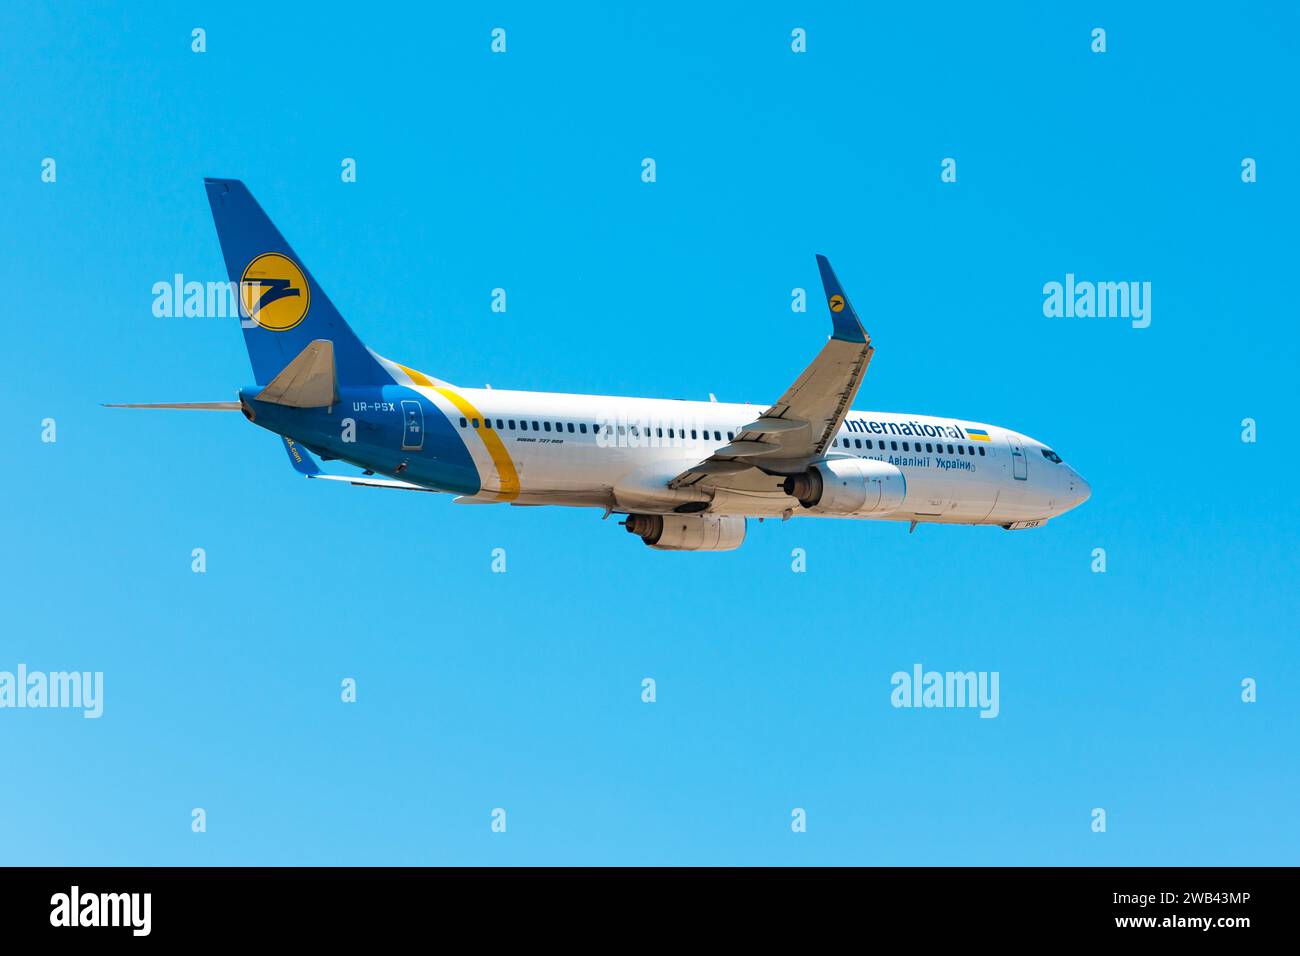 Boryspil, Ukraine - August 24, 2019: Airplane Boeing 737-800 (UR-PSX) of Ukraine International Airlines is taking-off from Boryspil Airport Stock Photo